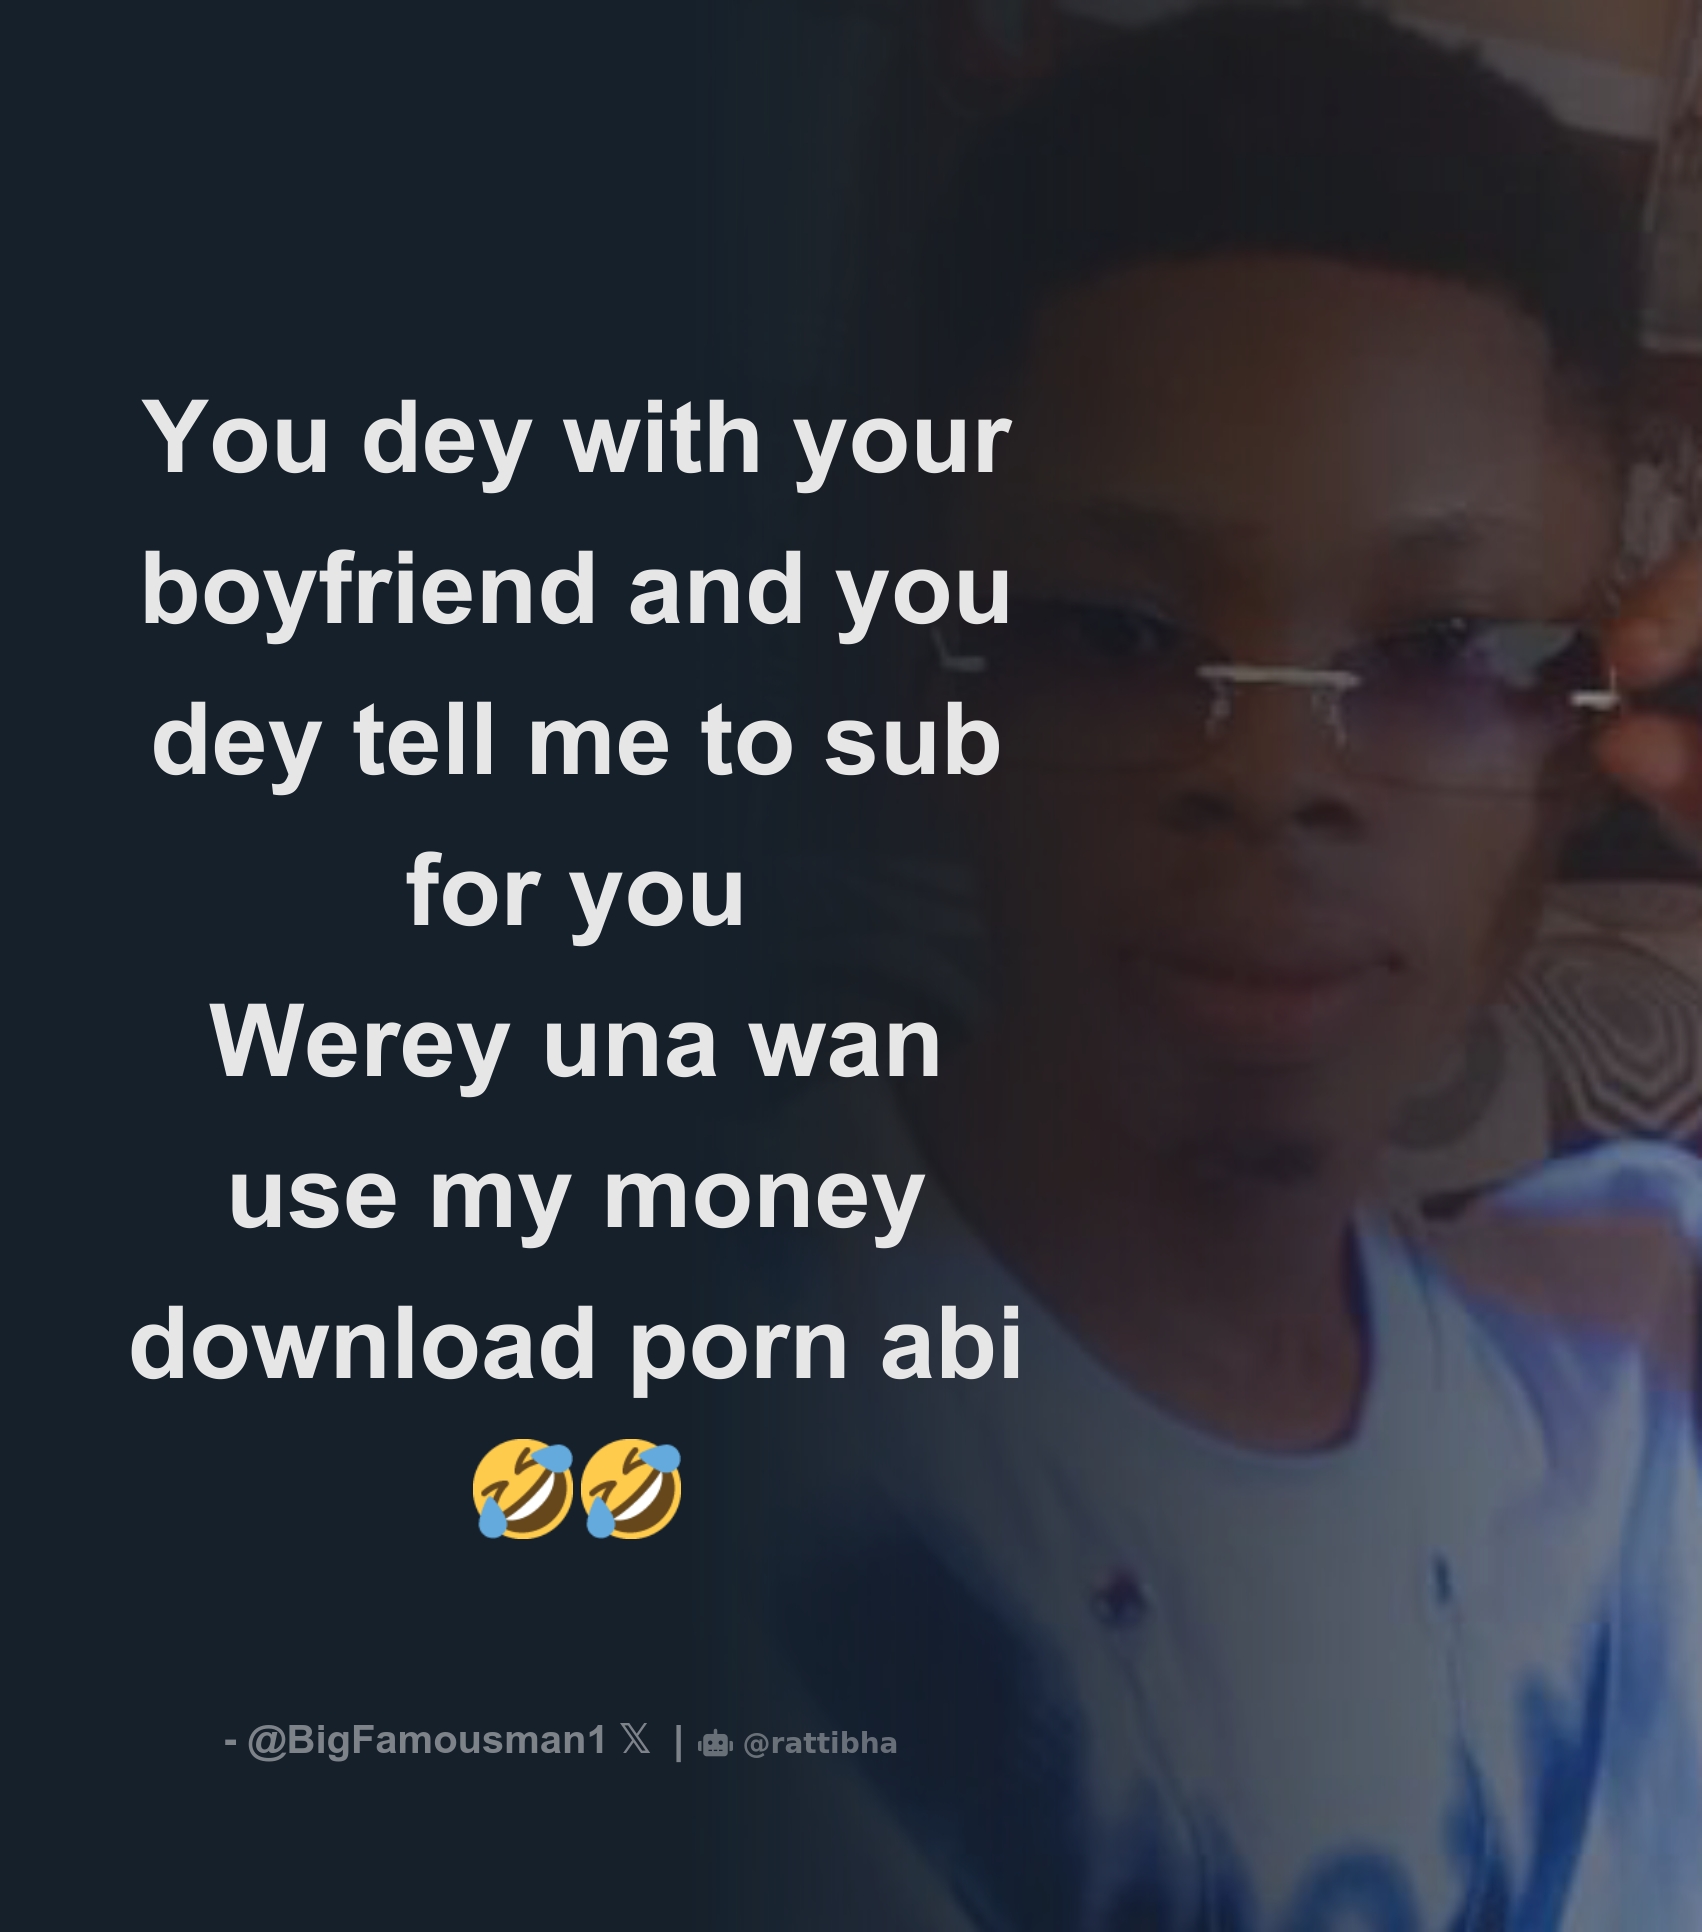 Bf Com Downloading - You dey with your boyfriend and you dey tell me to sub for you Werey una  wan use my money download porn abi ðŸ¤£ðŸ¤£ - Thread from Big Famous  @BigFamous001 - Rattibha